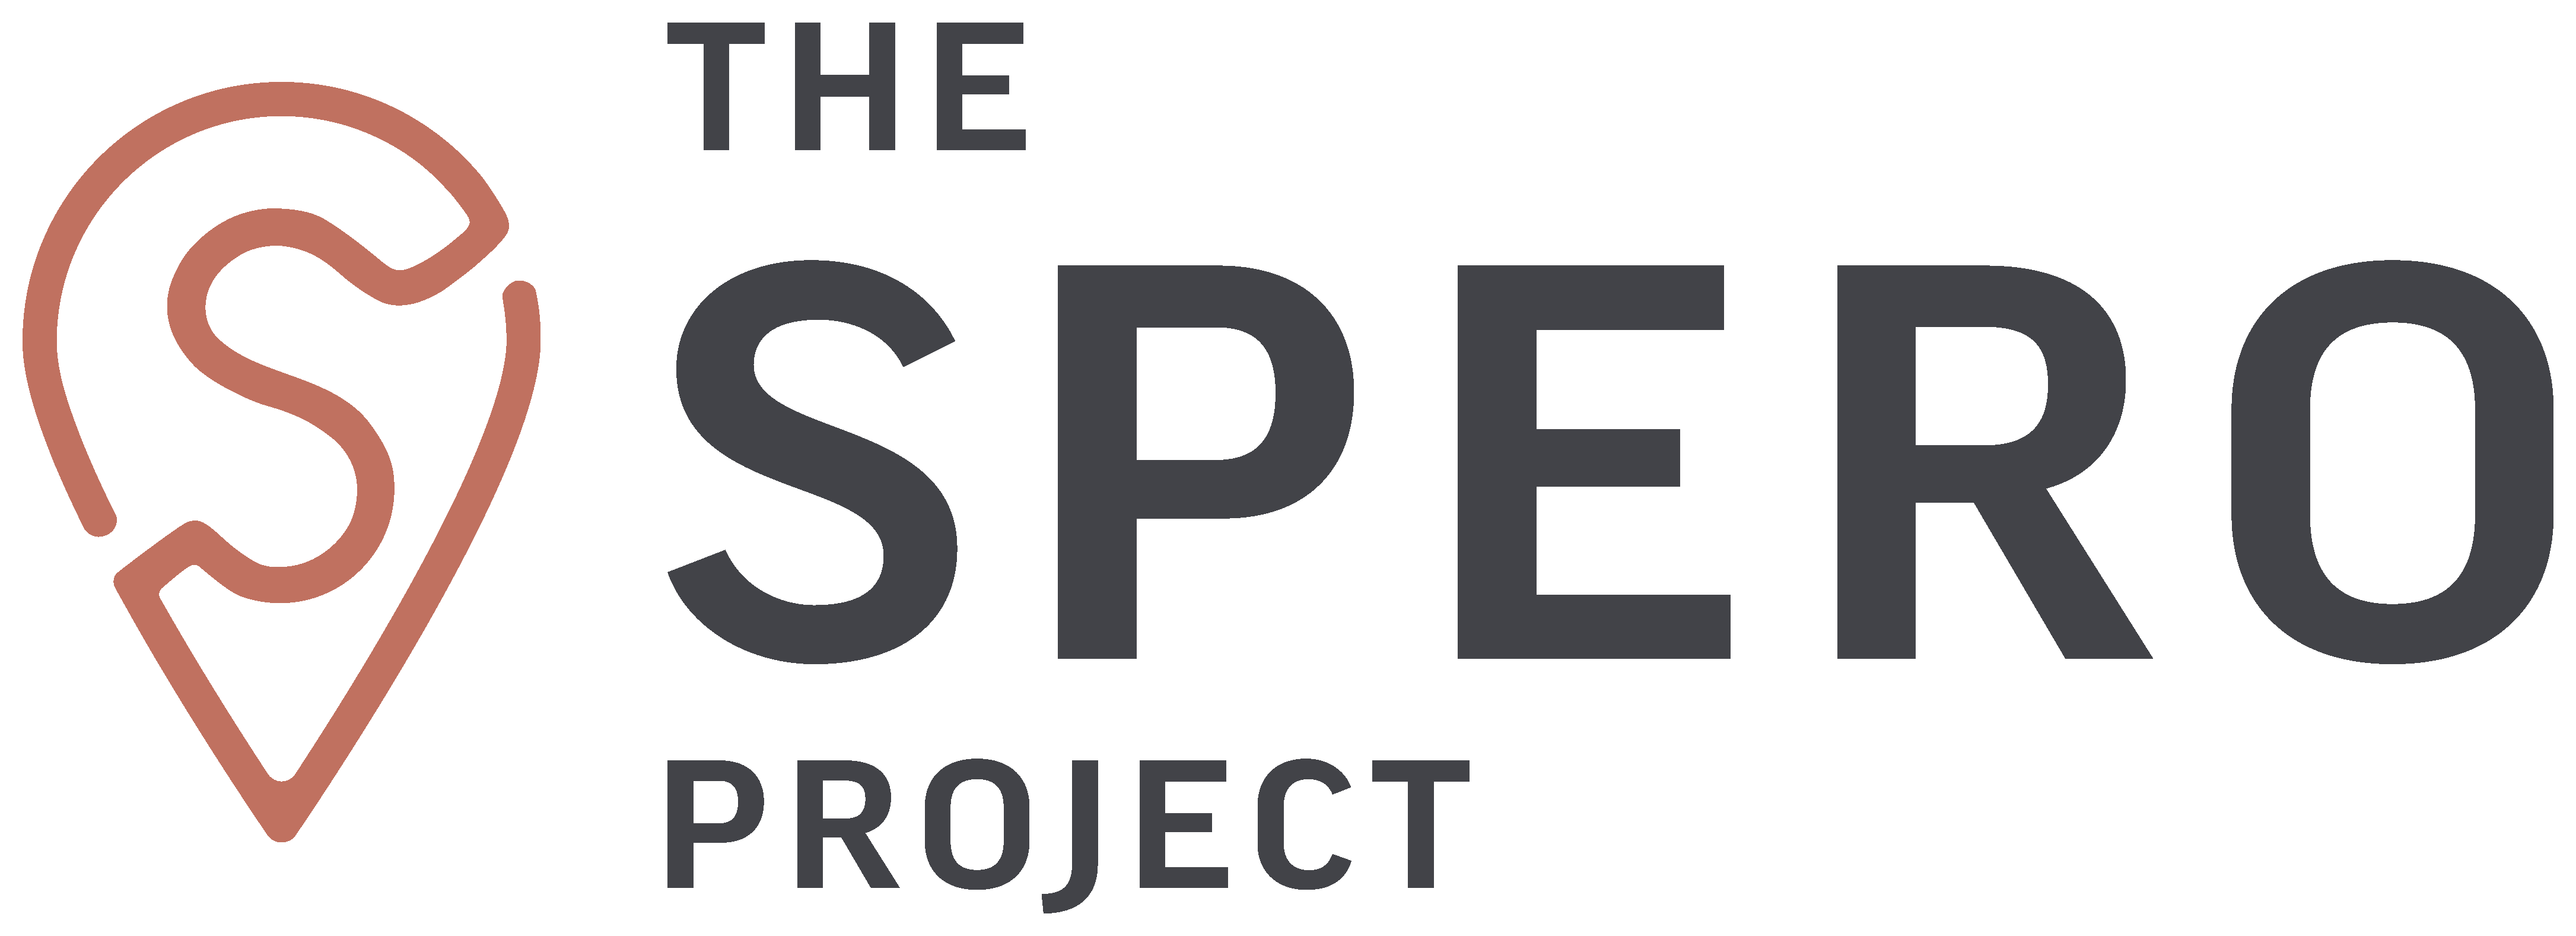 The Spero Project - Adult Education logo